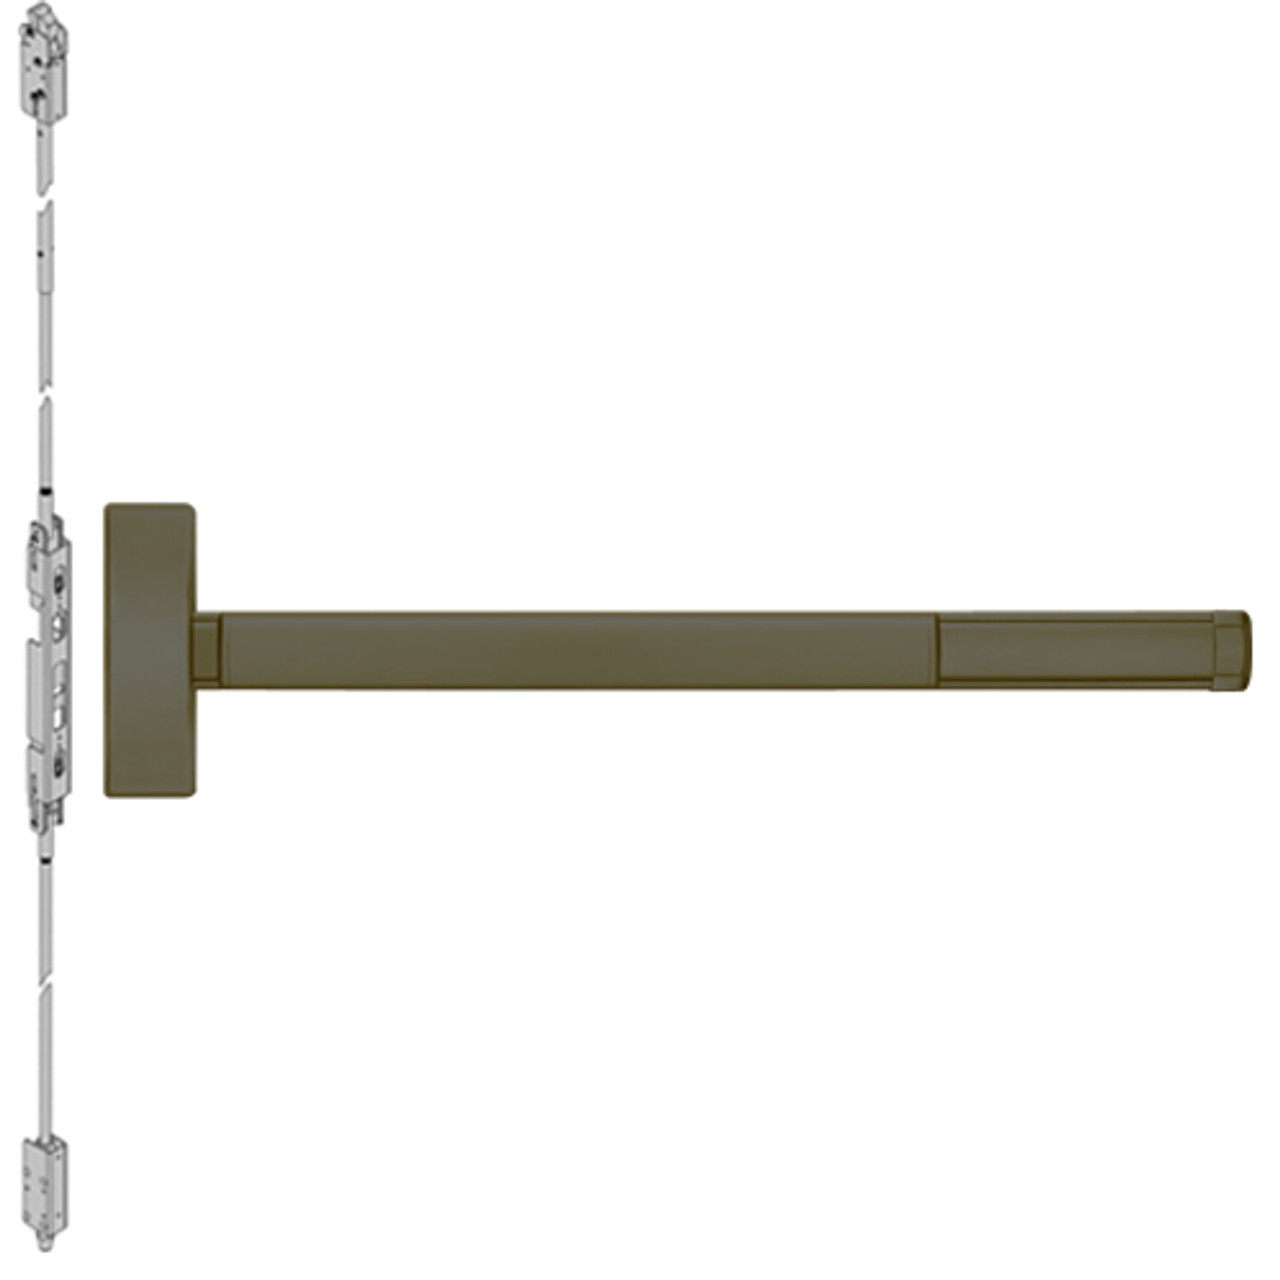 ELR2814LBR-613-36 PHI 2800 Series Concealed Vertical Rod Exit Device with Electric Latch Retraction Prepped for Lever-Knob Always Active in Oil Rubbed Bronze Finish